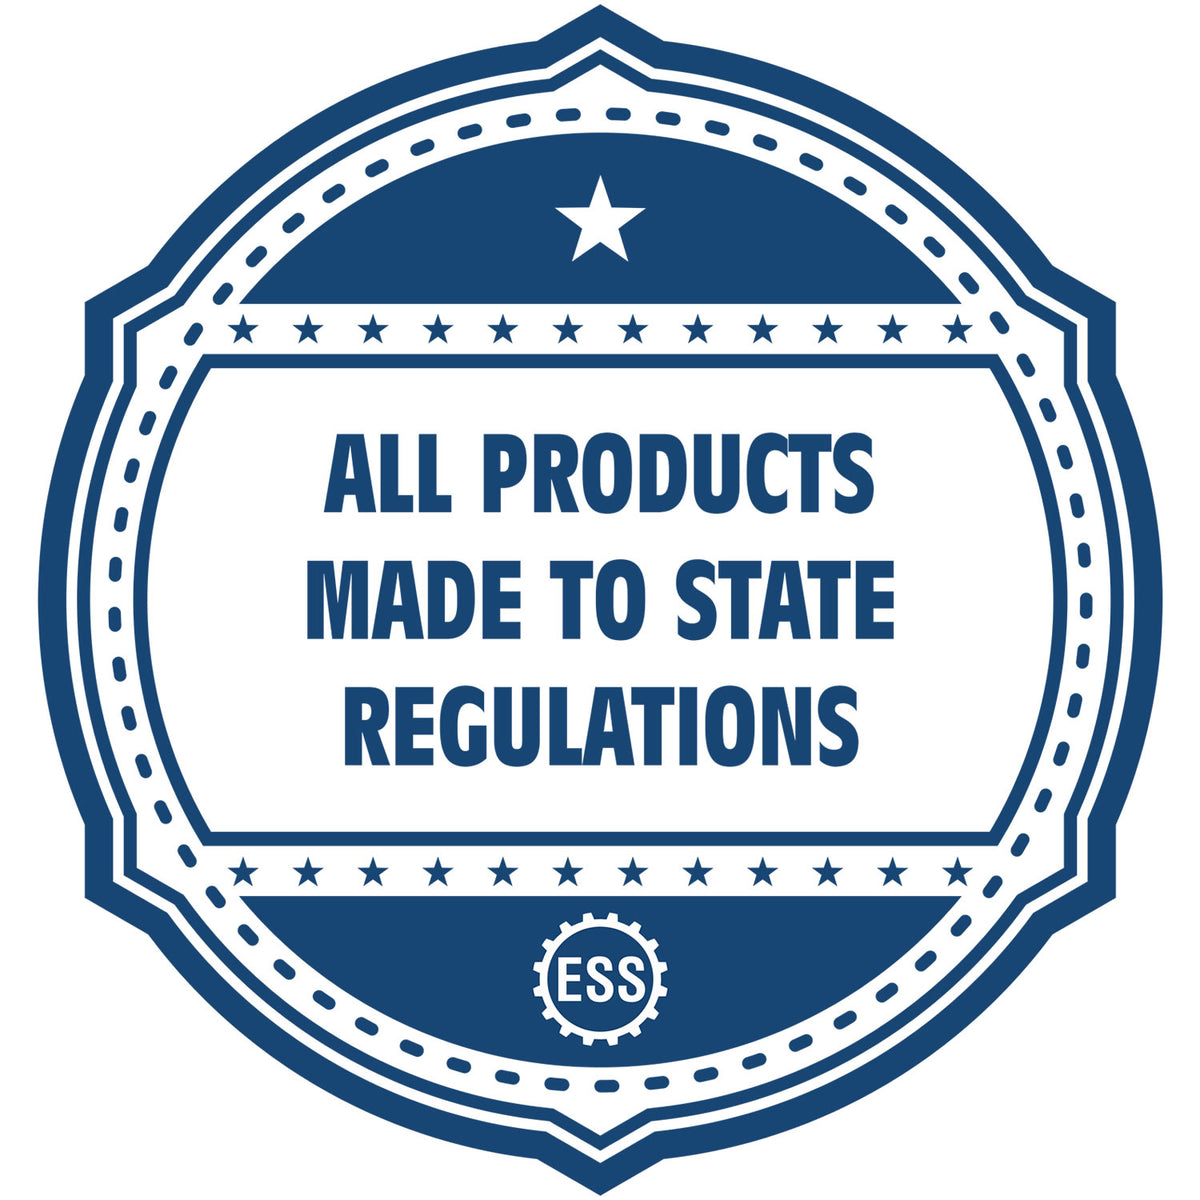 An icon or badge element for the Delaware Desk Surveyor Seal Embosser showing that this product is made in compliance with state regulations.